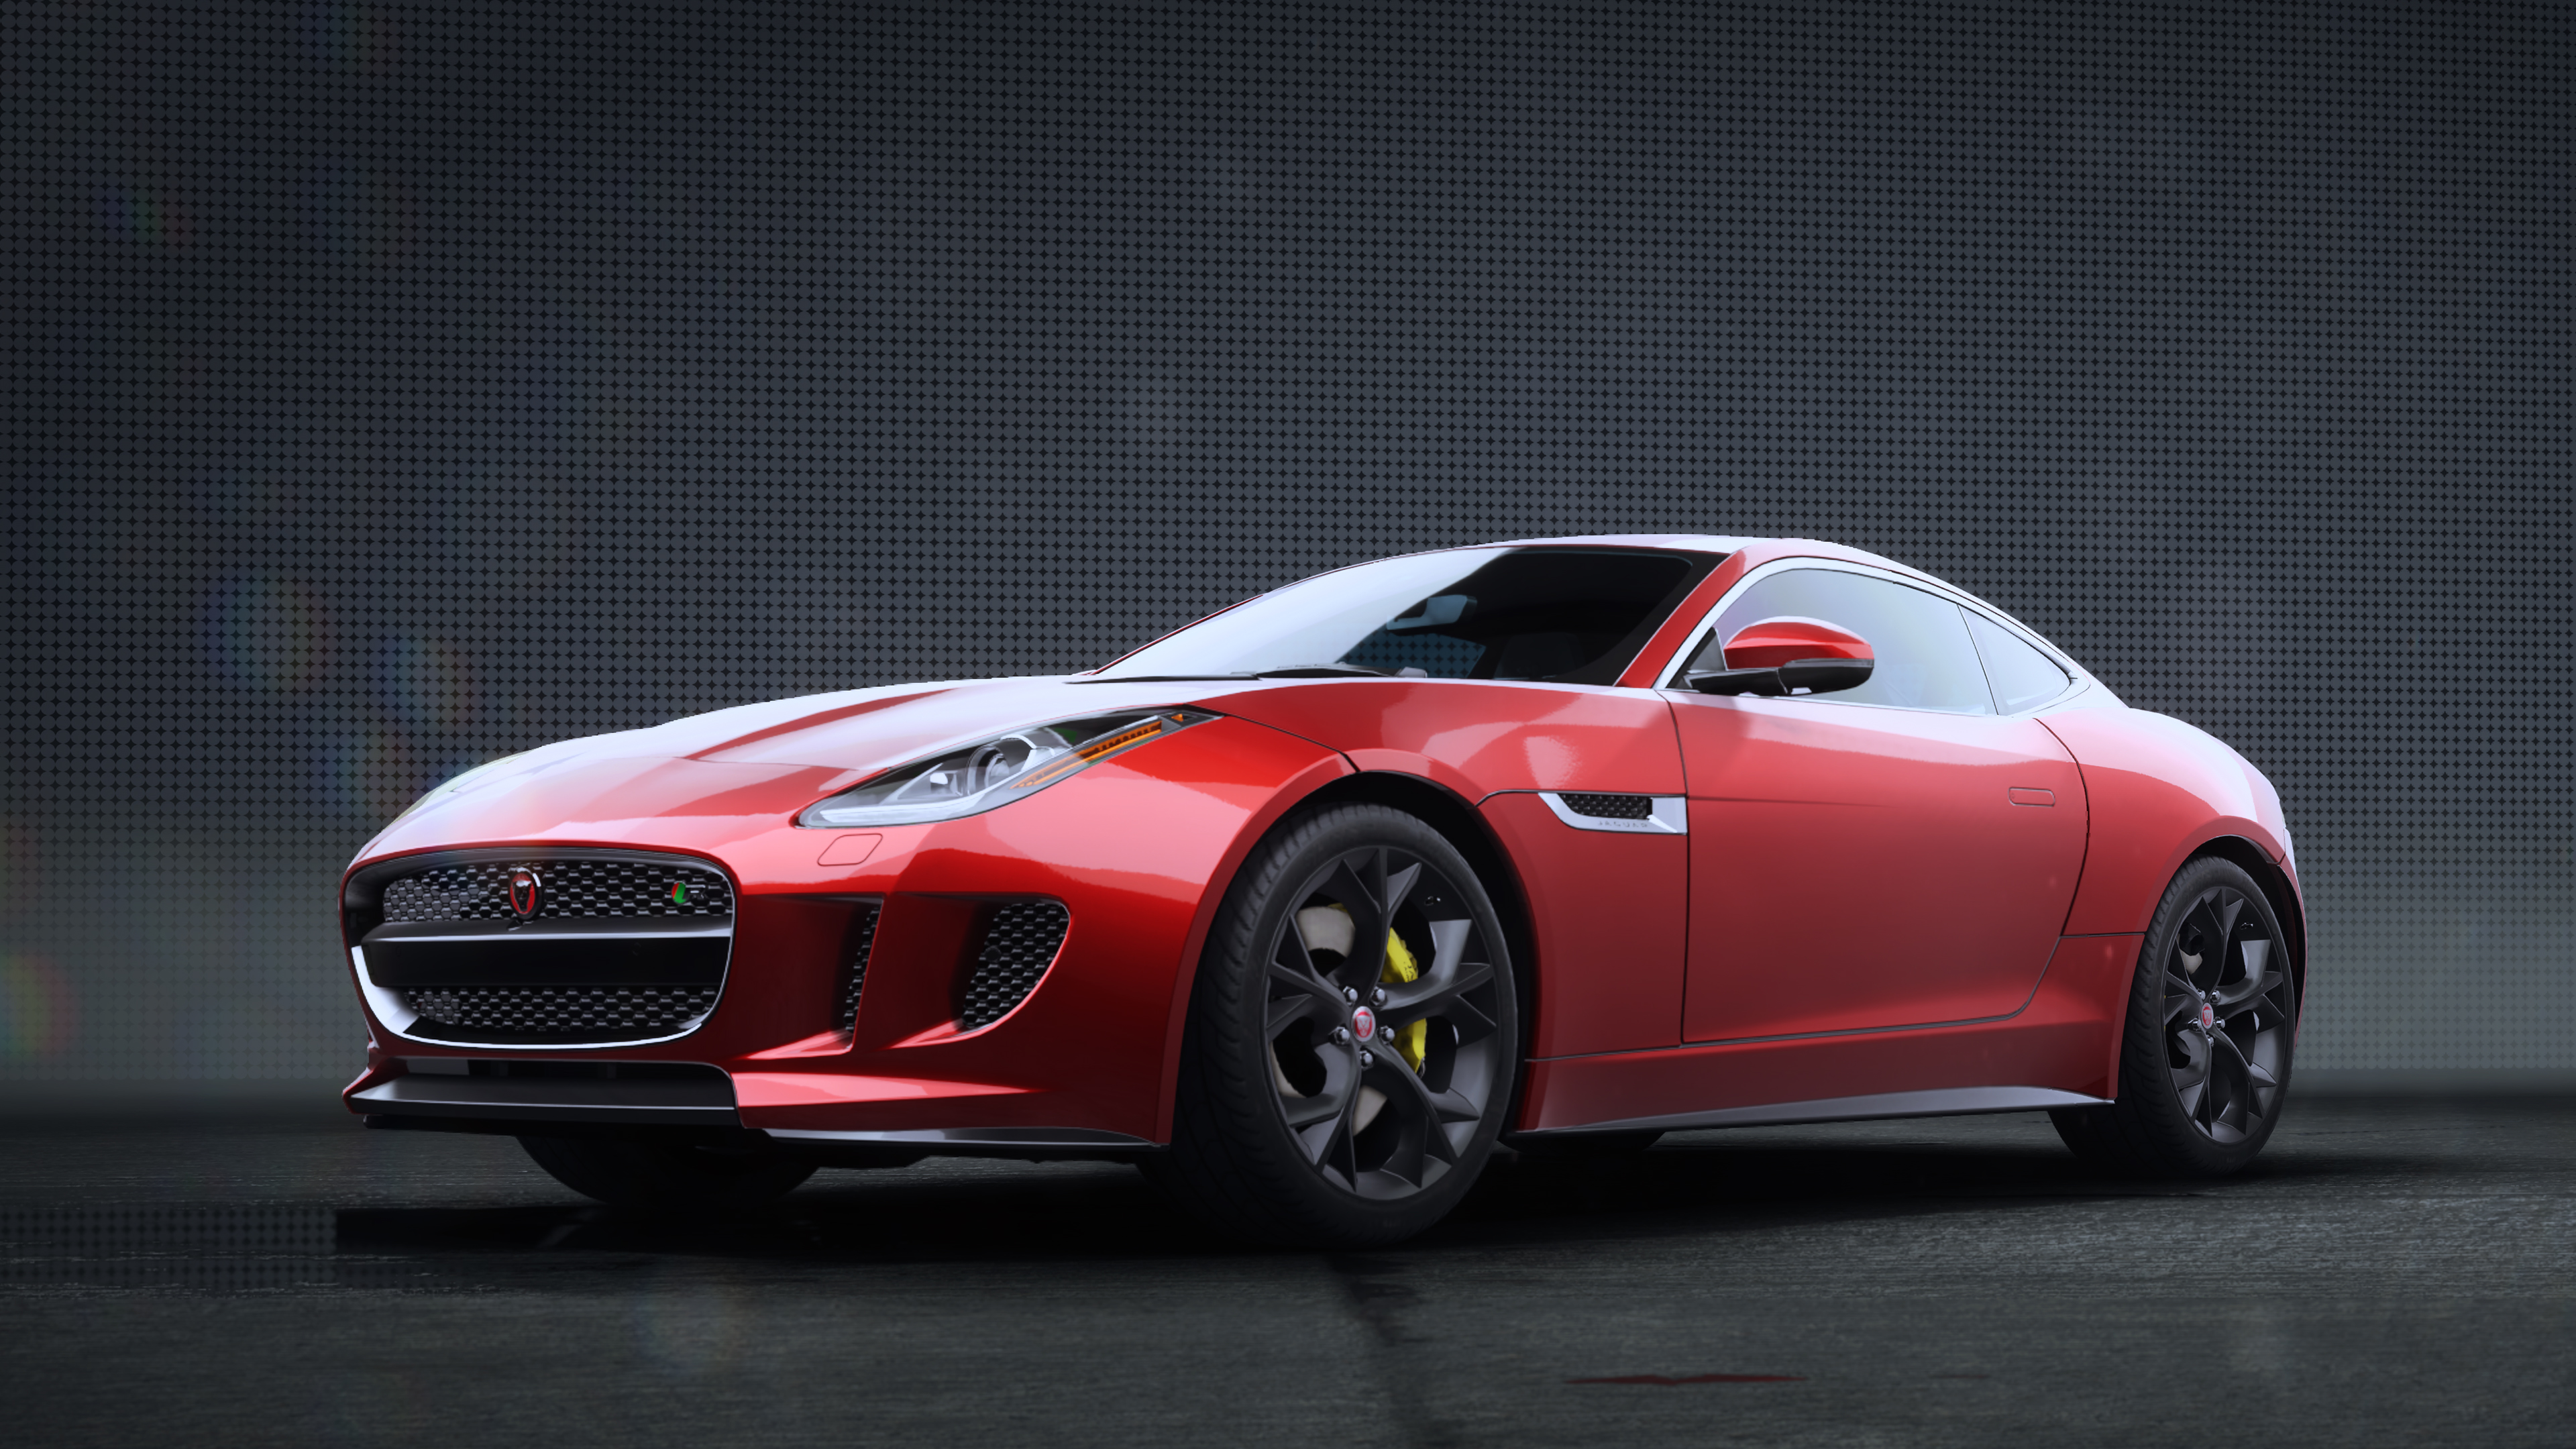 f type r couoe